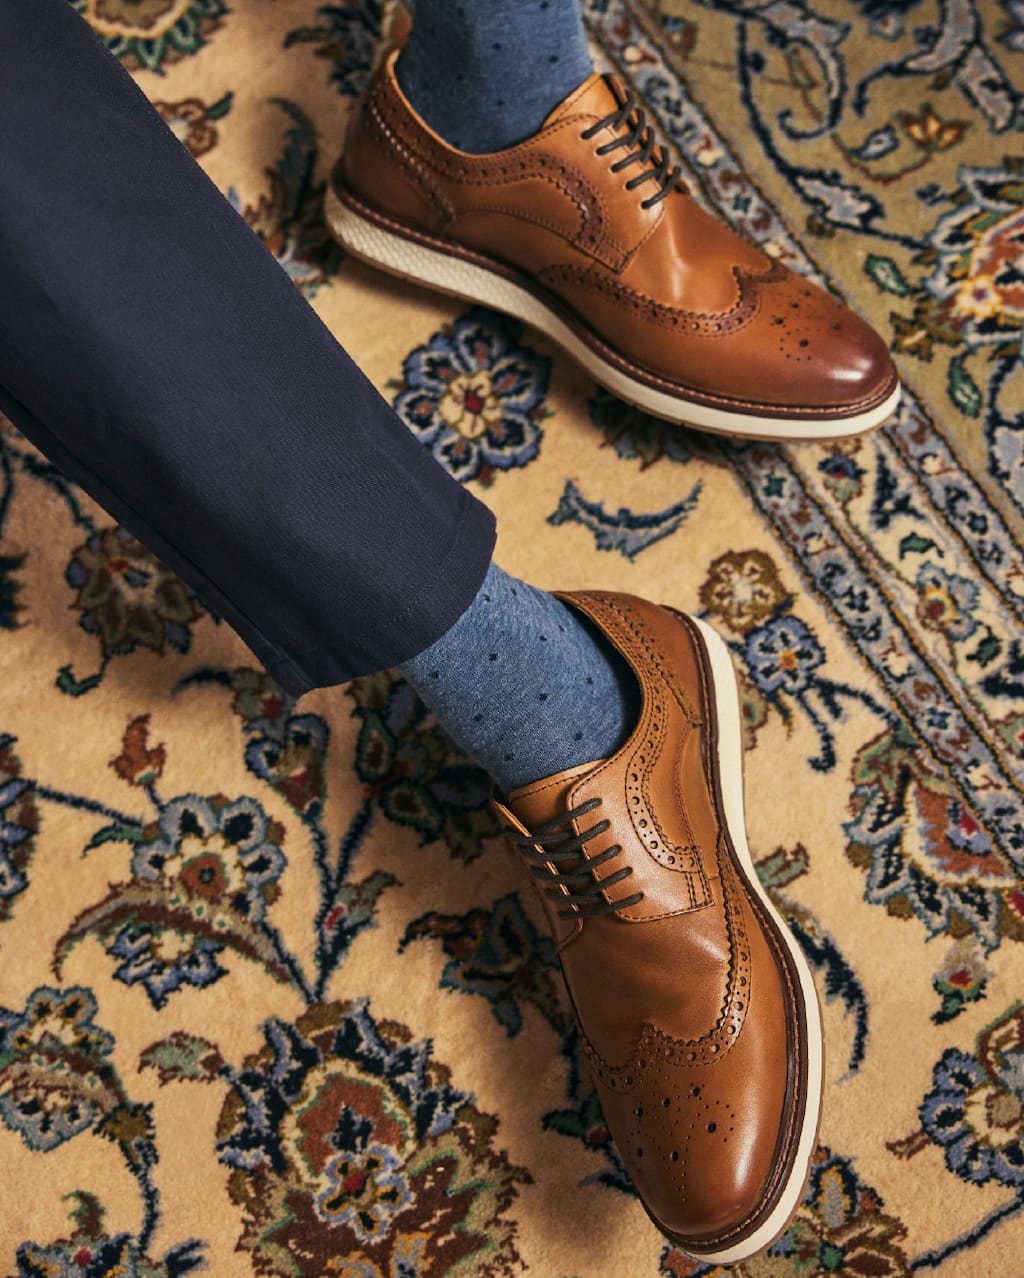 Best mens dress shoes: The best dress shoes for men, right in time